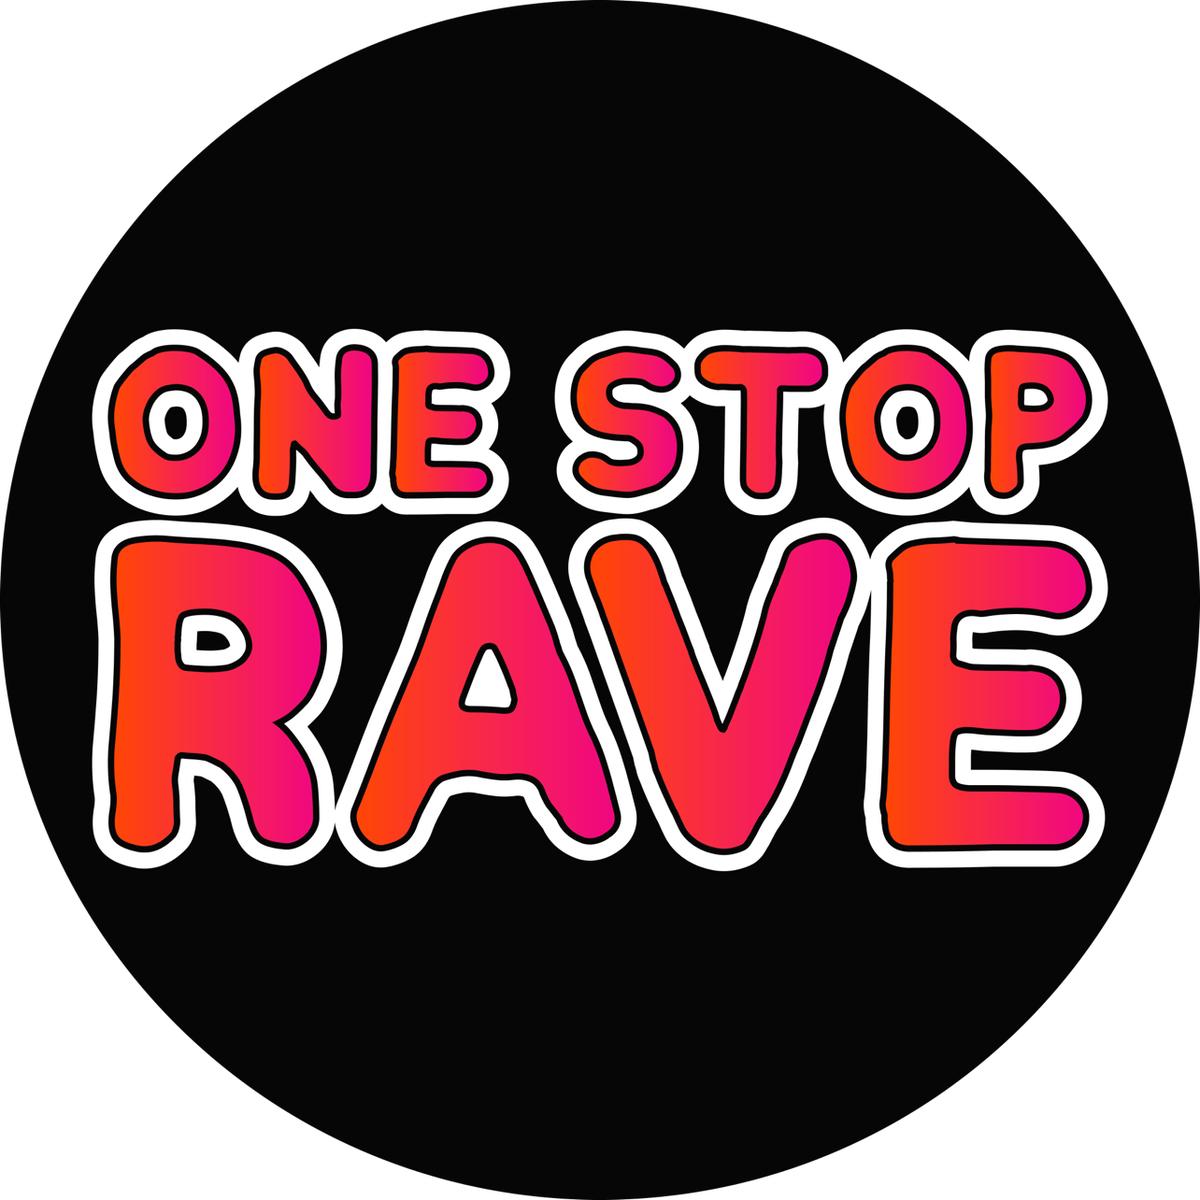 One Stop Rave's images